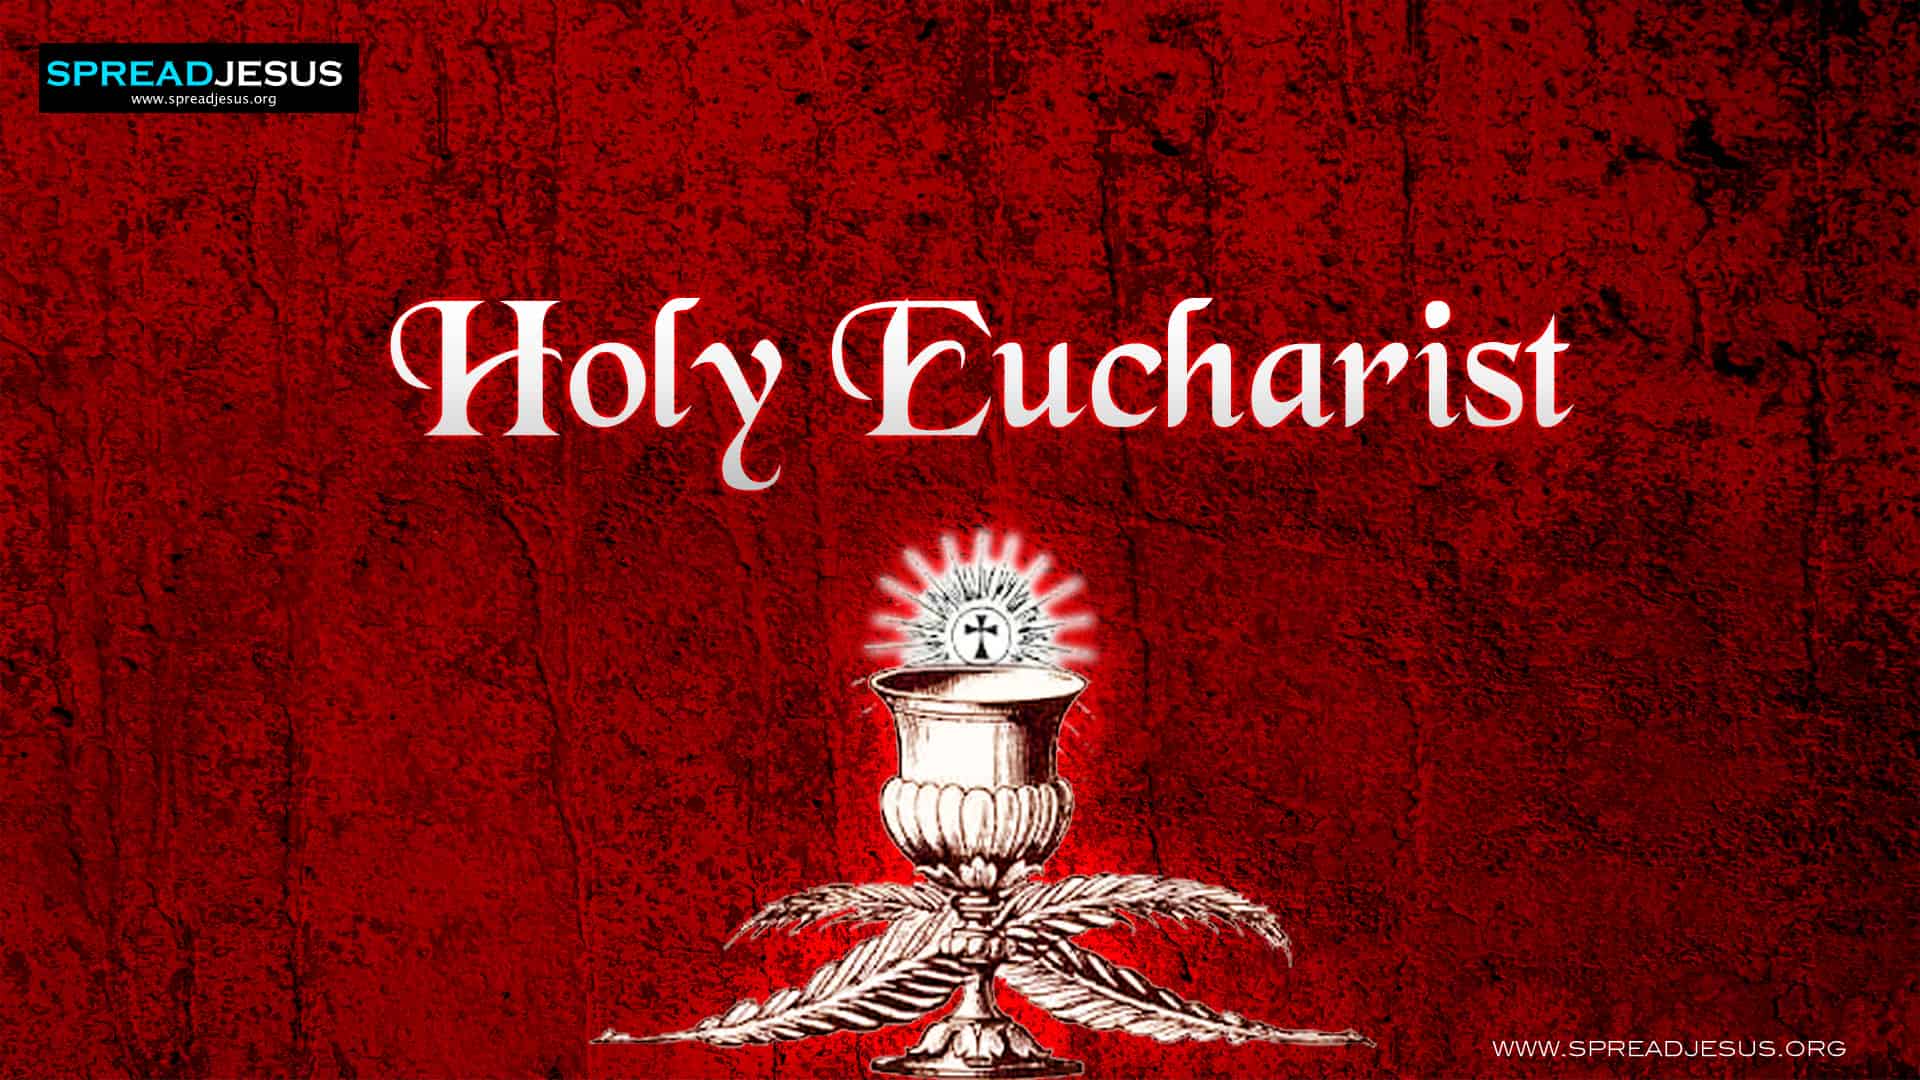  - the-Seven-Sacrements-3-Holy-Eucharist-Wallpaper-HD-Catholic-wallpapers